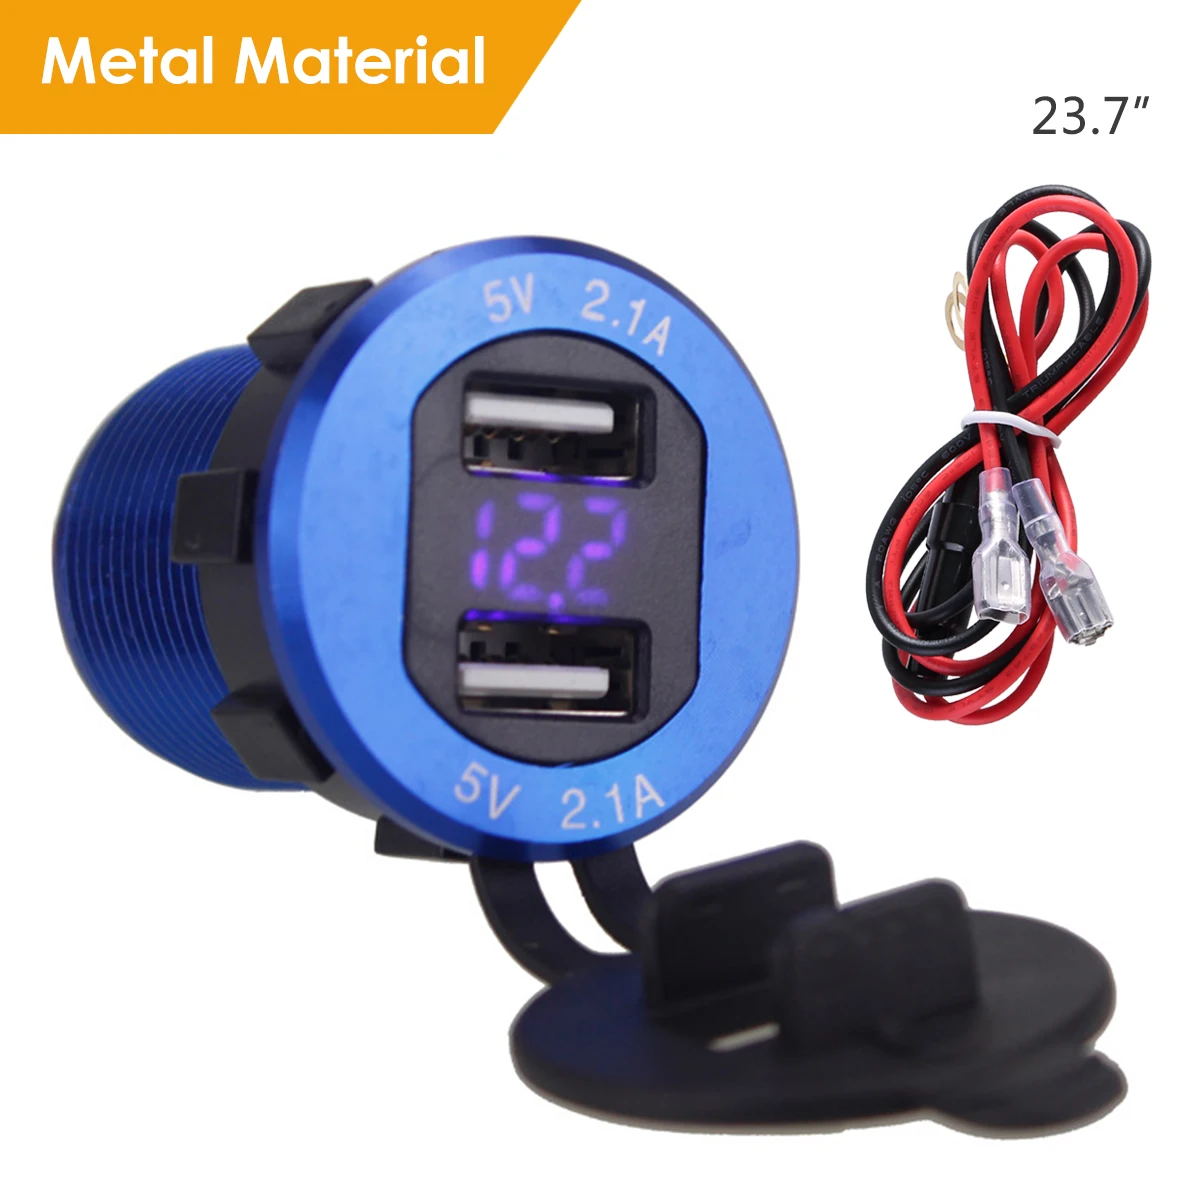 

Dual USB Charger Socket Waterproof Power Outlet 2.1A with Voltmeter Wire in-line 10A Fuse for 12-24V Car Boat Marine Motorcycle